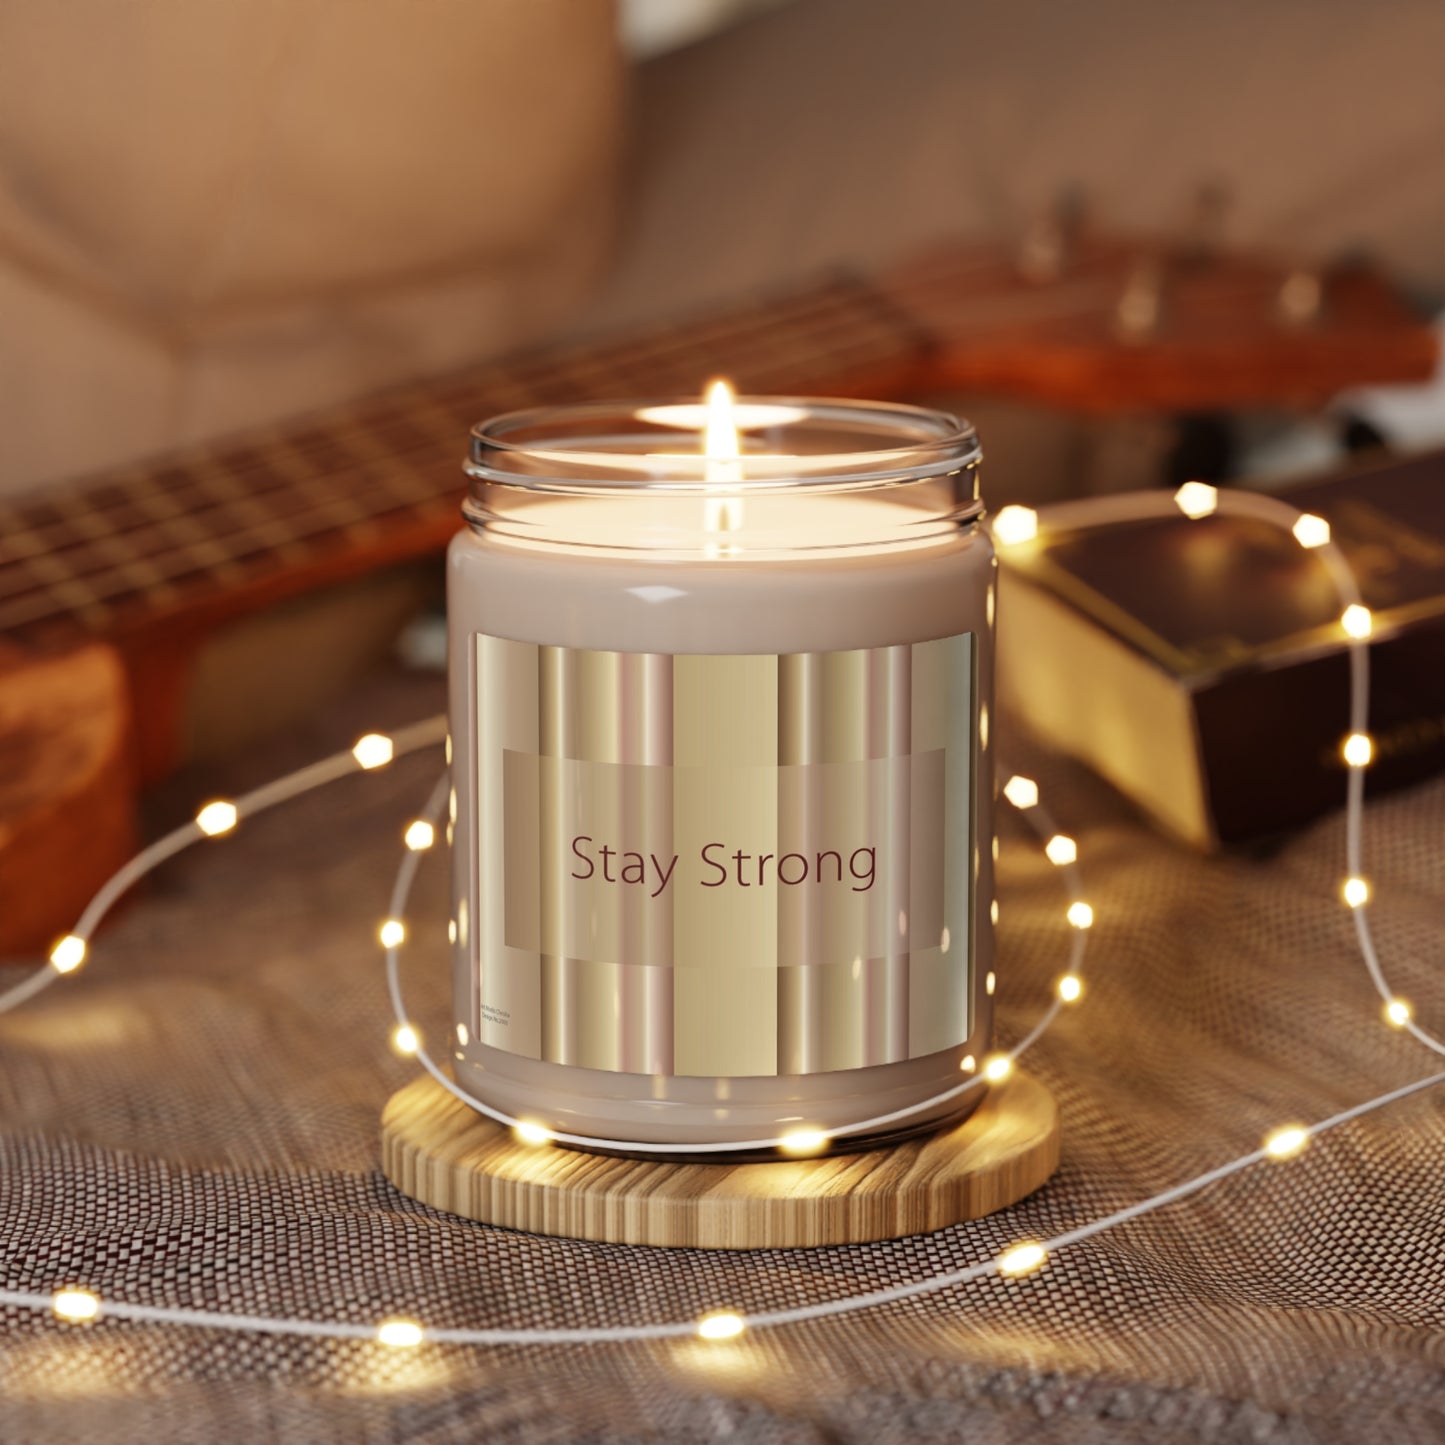 Scented Soy Candle, 9oz Stay Strong - Design No.2000